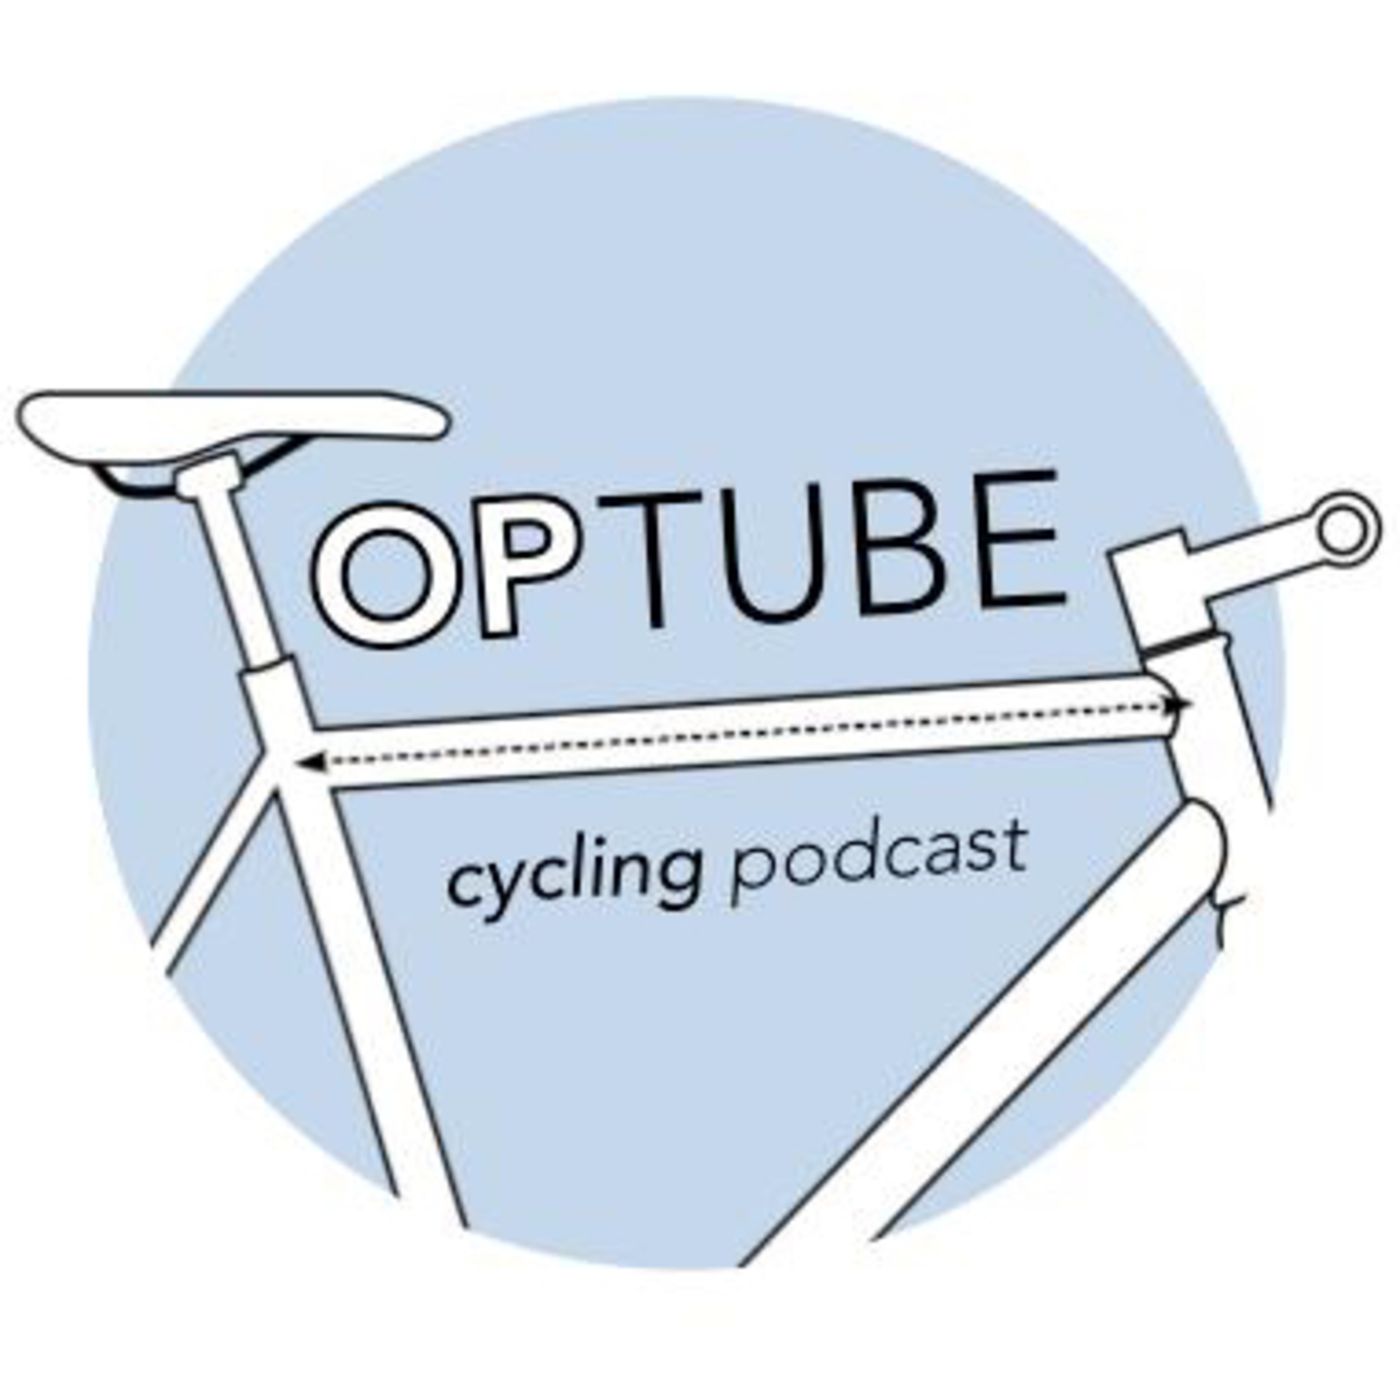 The Top Tube Cycling Podcast